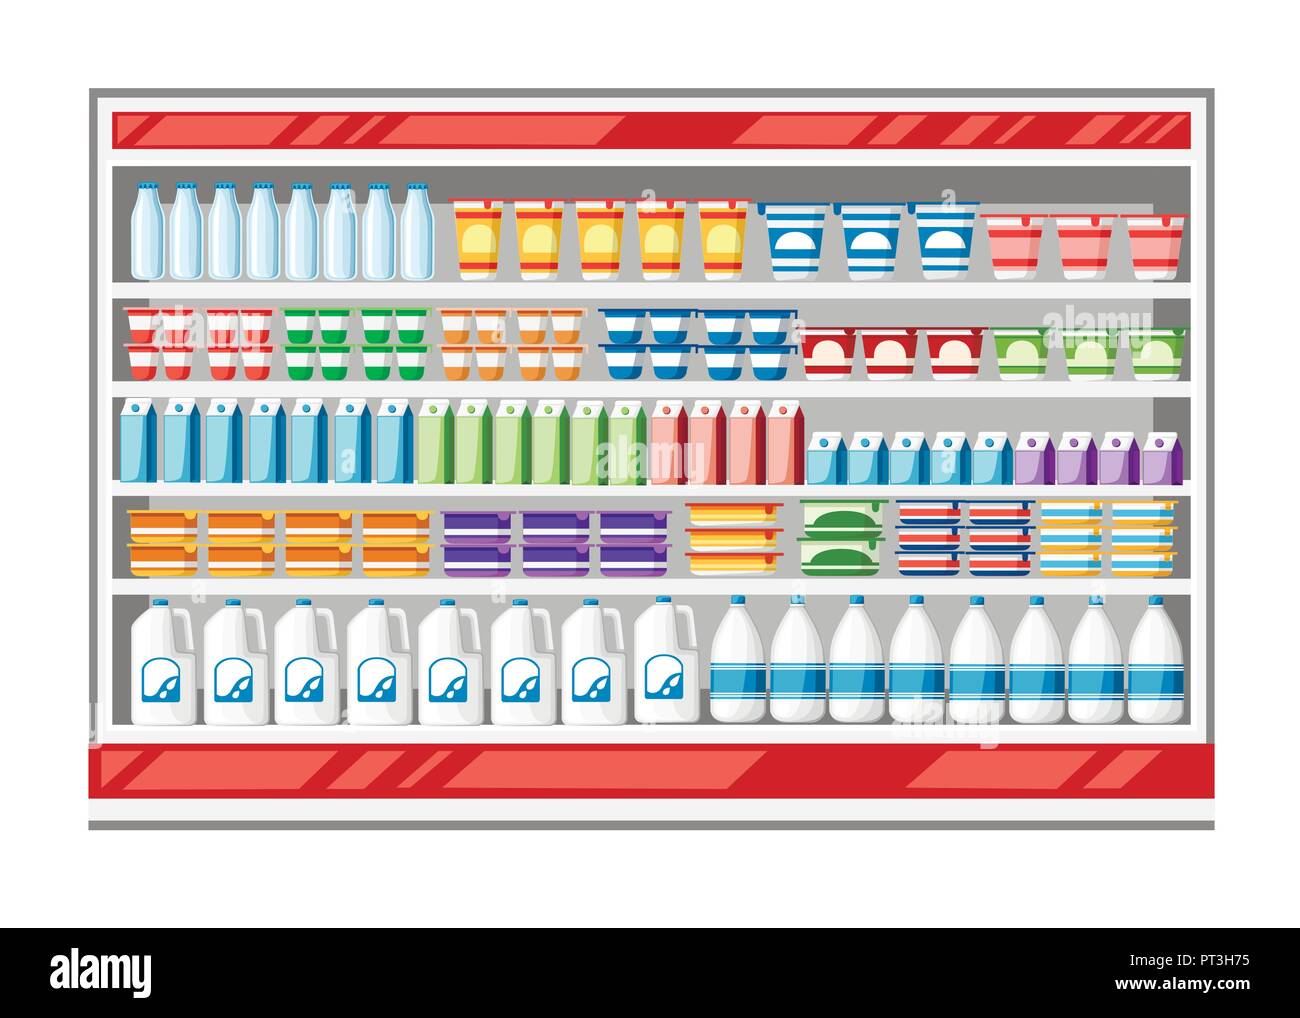 Showcase fridge for cooling dairy products. Different colored bottles and boxes in fridge. Supermarket cooling shelf for milk, yogurt, sour cream. Fla Stock Vector